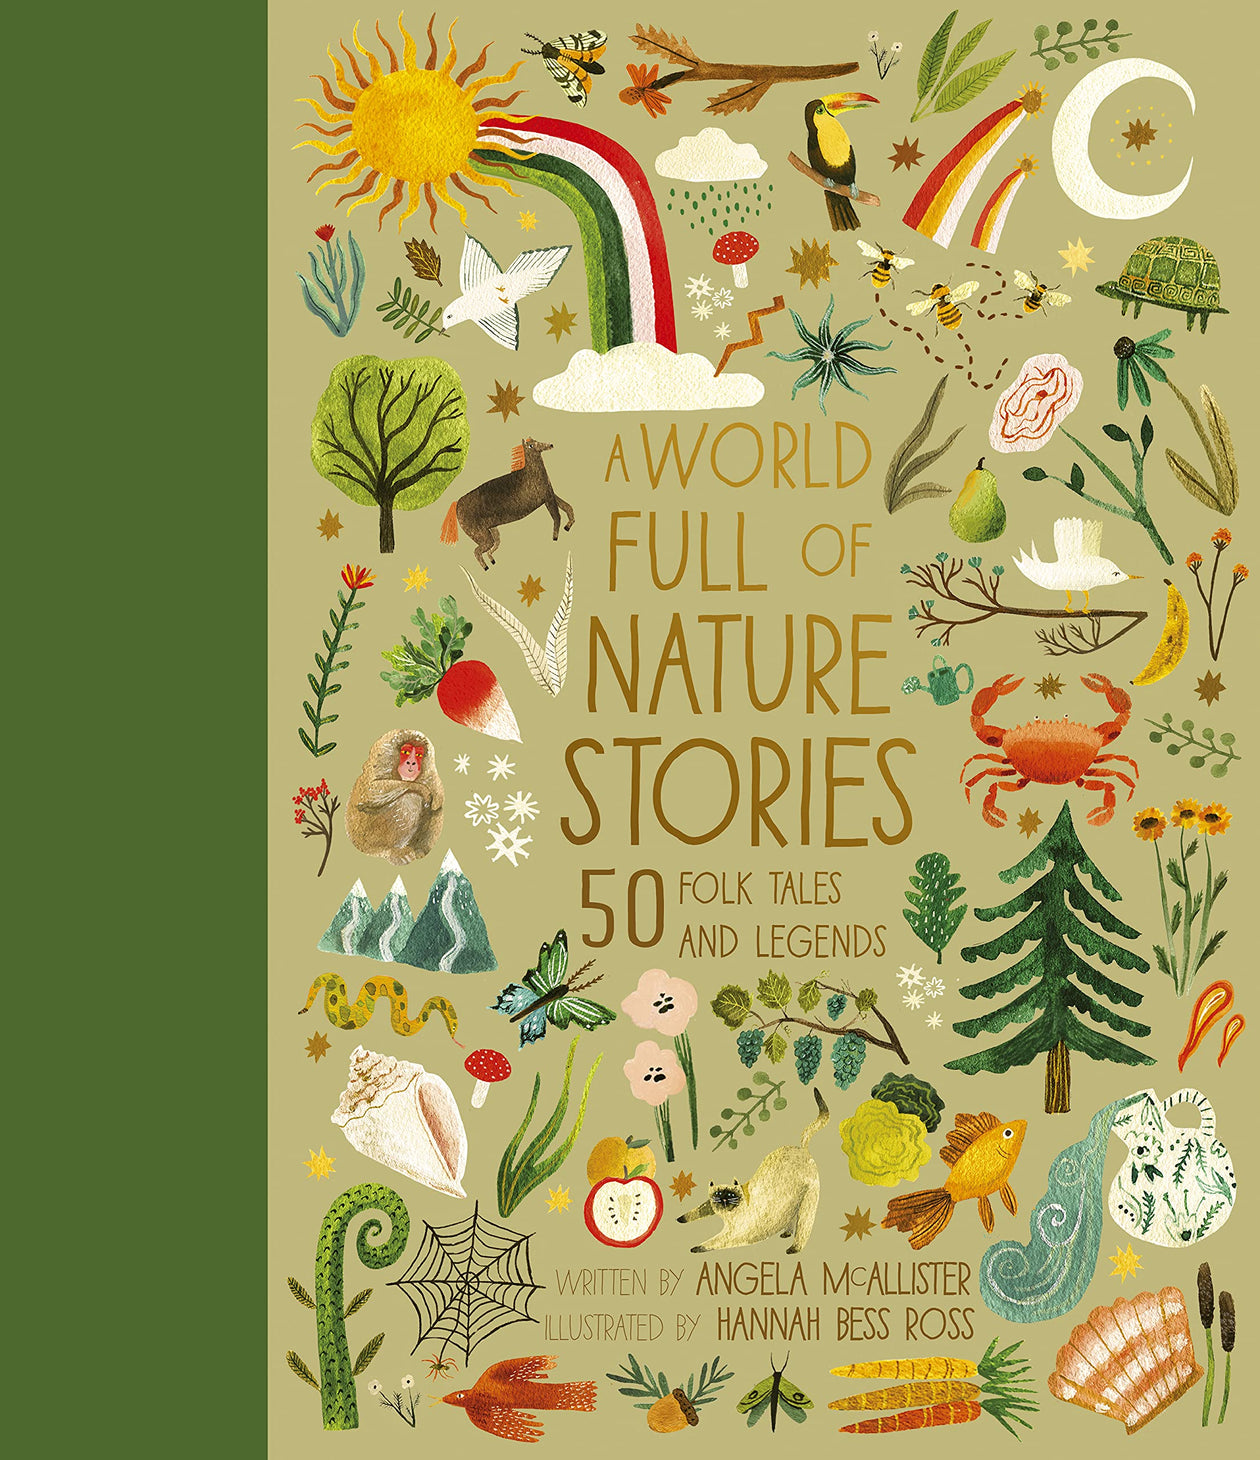 A World Full of Nature Stories by Angela McAllister, illustrated by Hannah Bess Ross